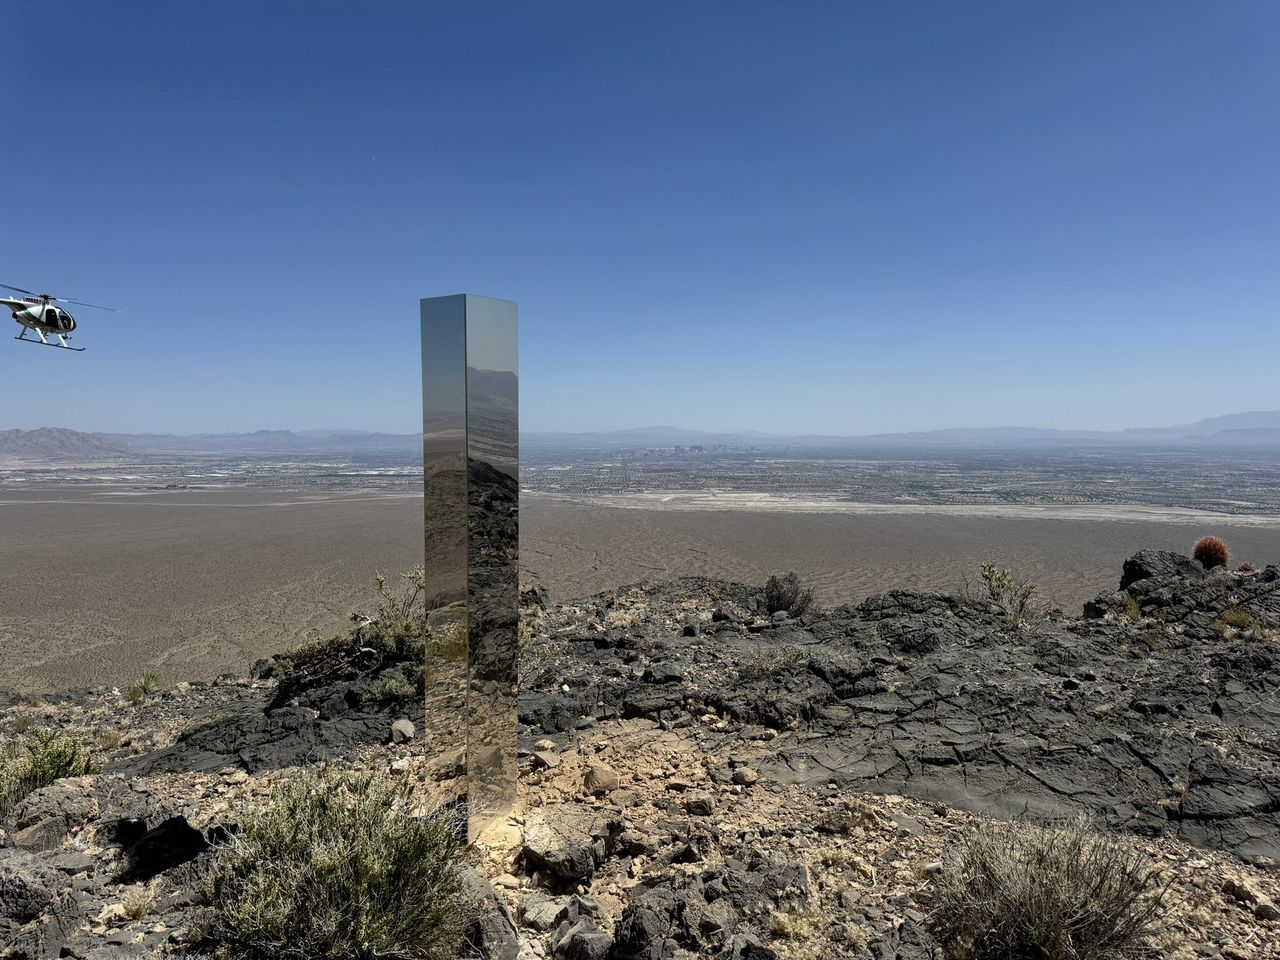 Mysterious monolith appears in Nevada desert, speculation ensues